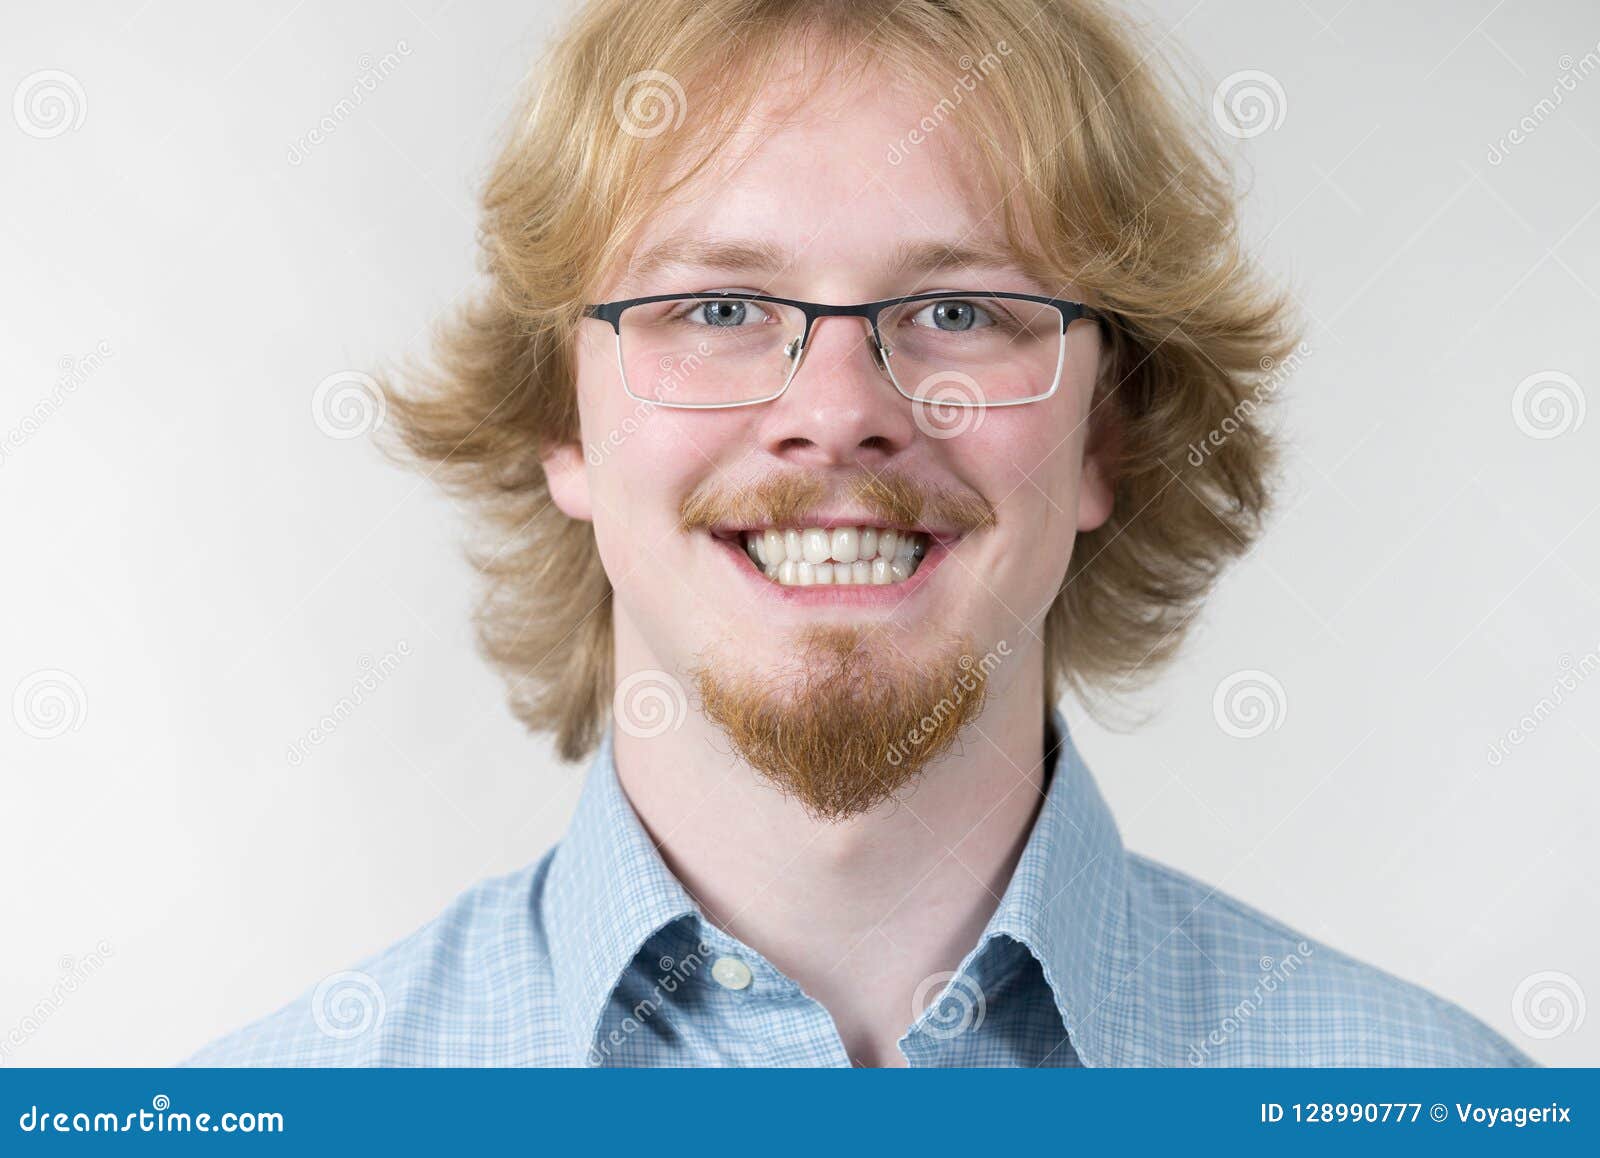 Funny Looking Young Adult Guy Stock Image - Image of ginger, adult:  128990777